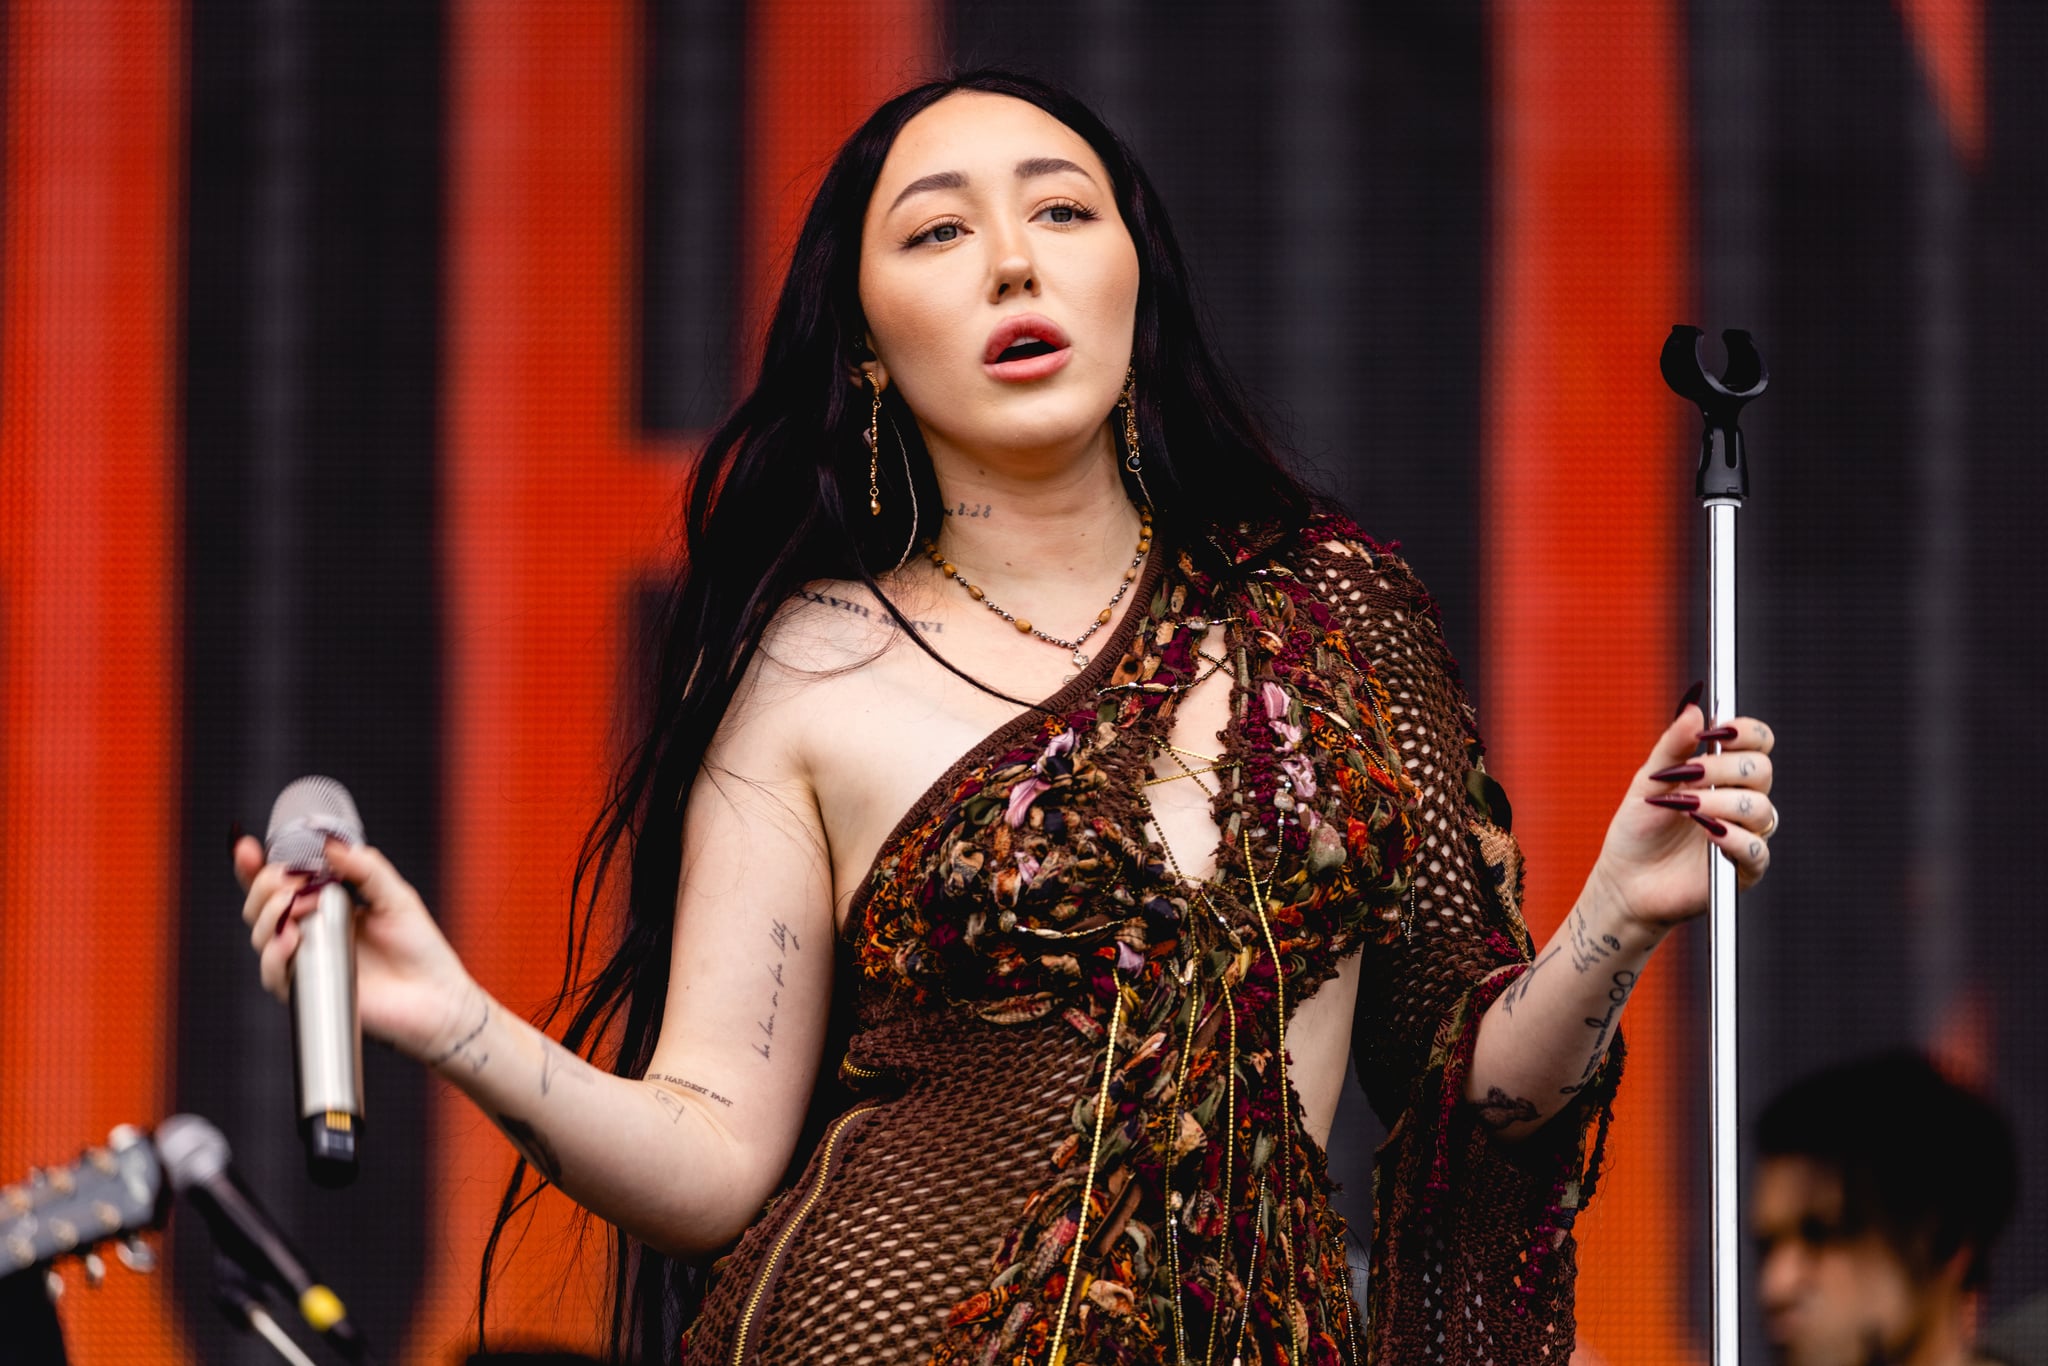 AUSTIN, TEXAS - OCTOBER 07: Noah Cyrus performs onstage during weekend one, day one of Austin City Limits Music Festival at Zilker Park on October 07, 2022 in Austin, Texas. (Photo by Rick Kern/WireImage)